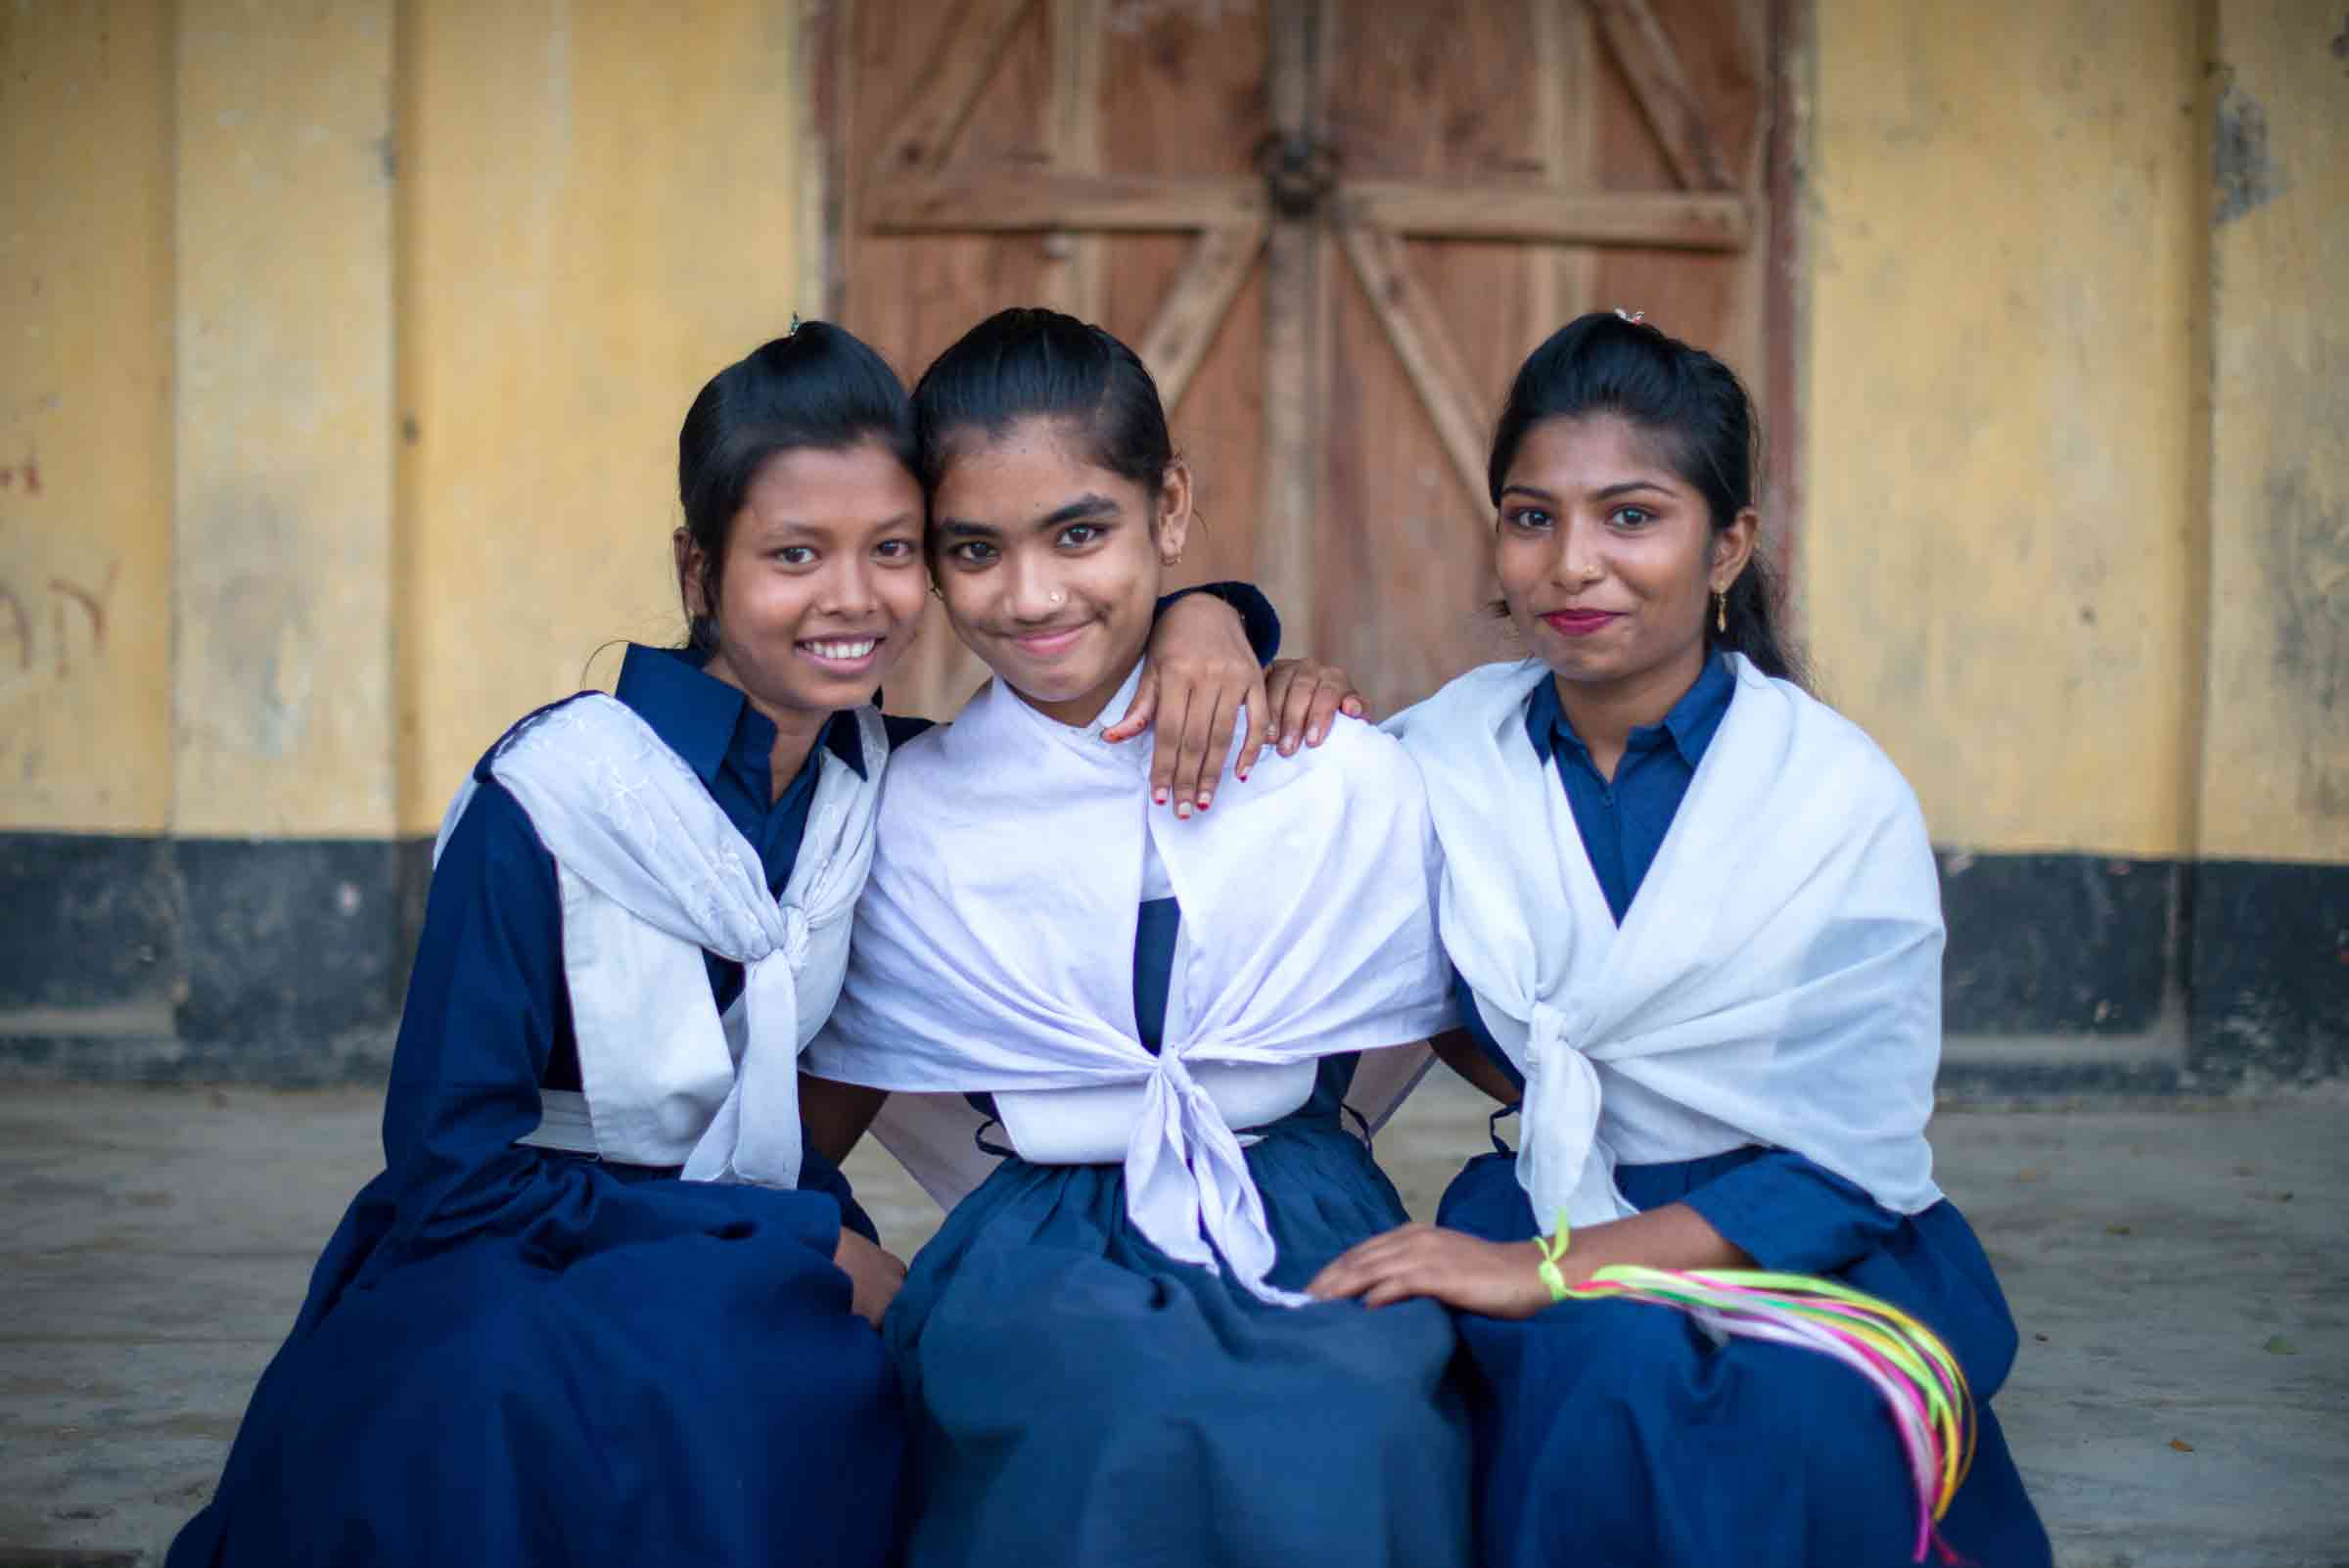 Girls in Bangladesh who received scholarships for school